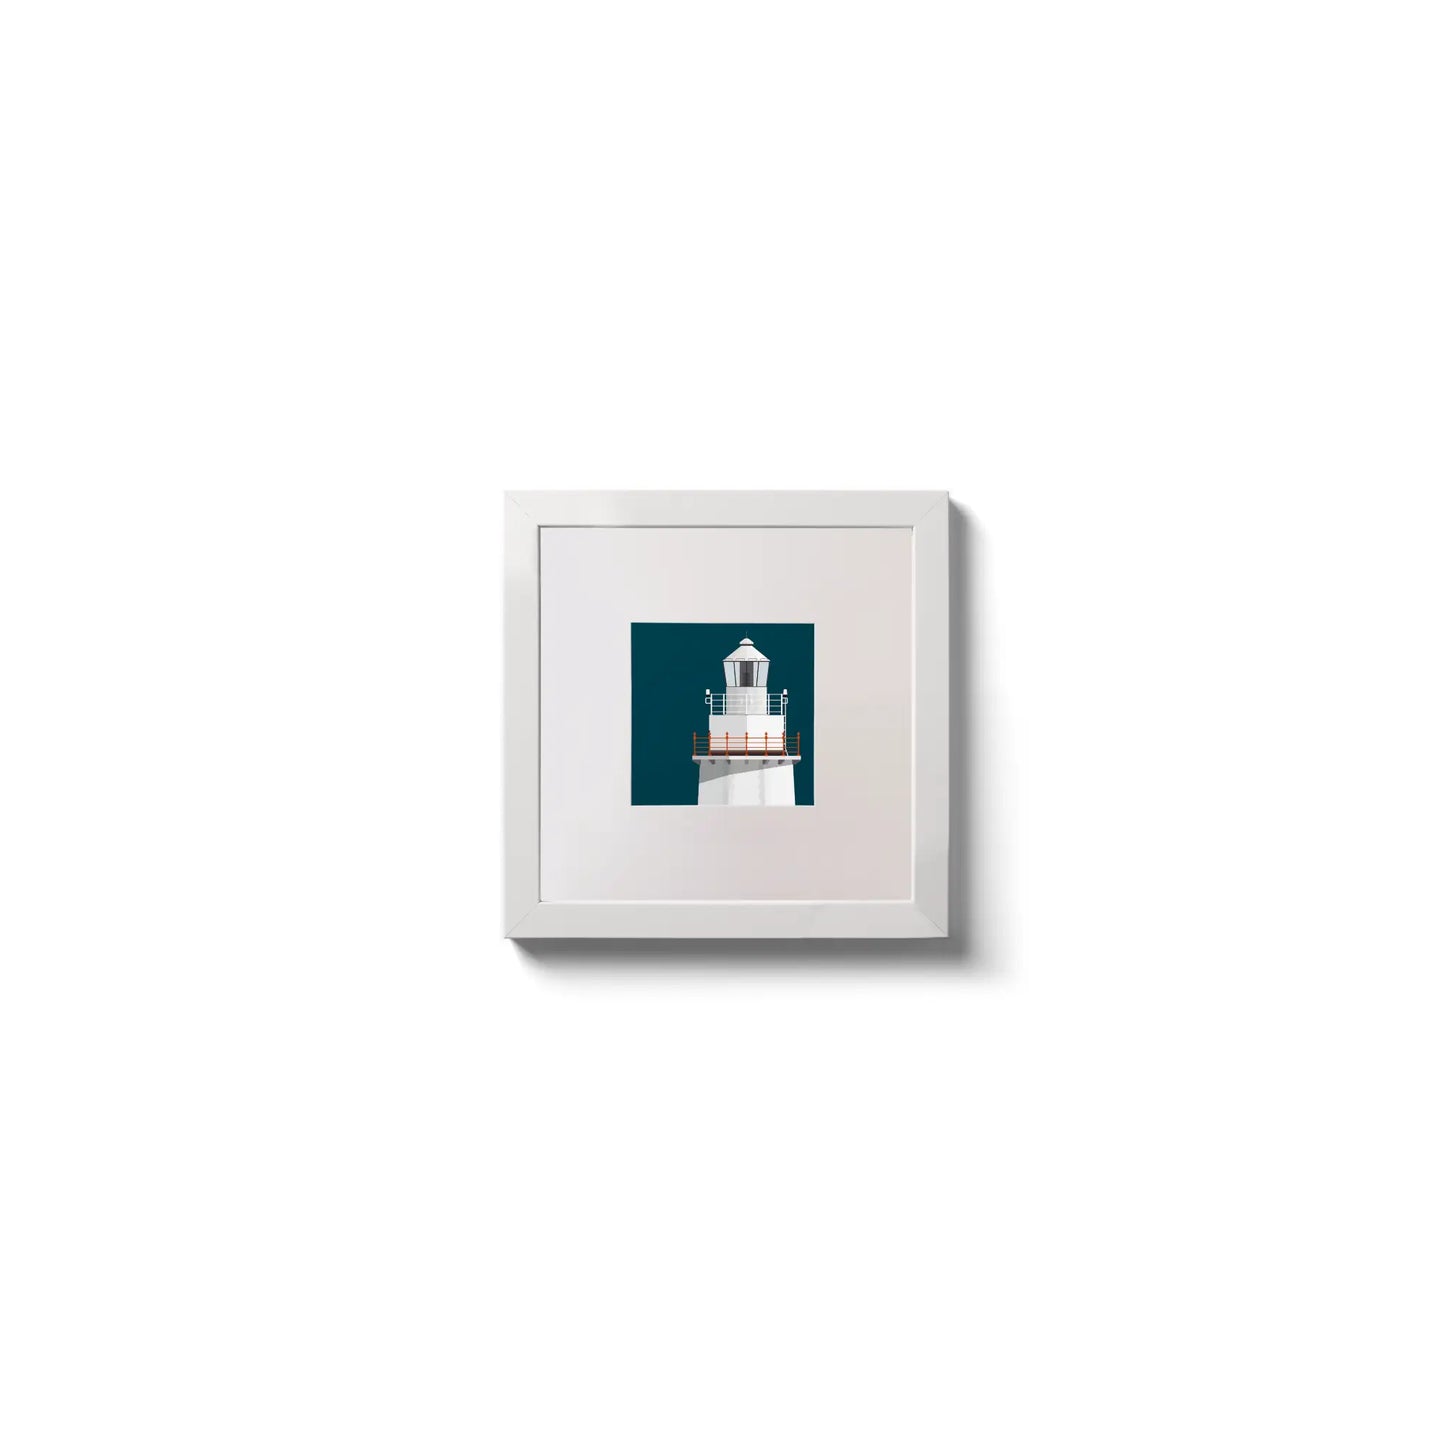 Illustration of Bull Rock lighthouse on a midnight blue background,  in a white square frame measuring 10x10cm.